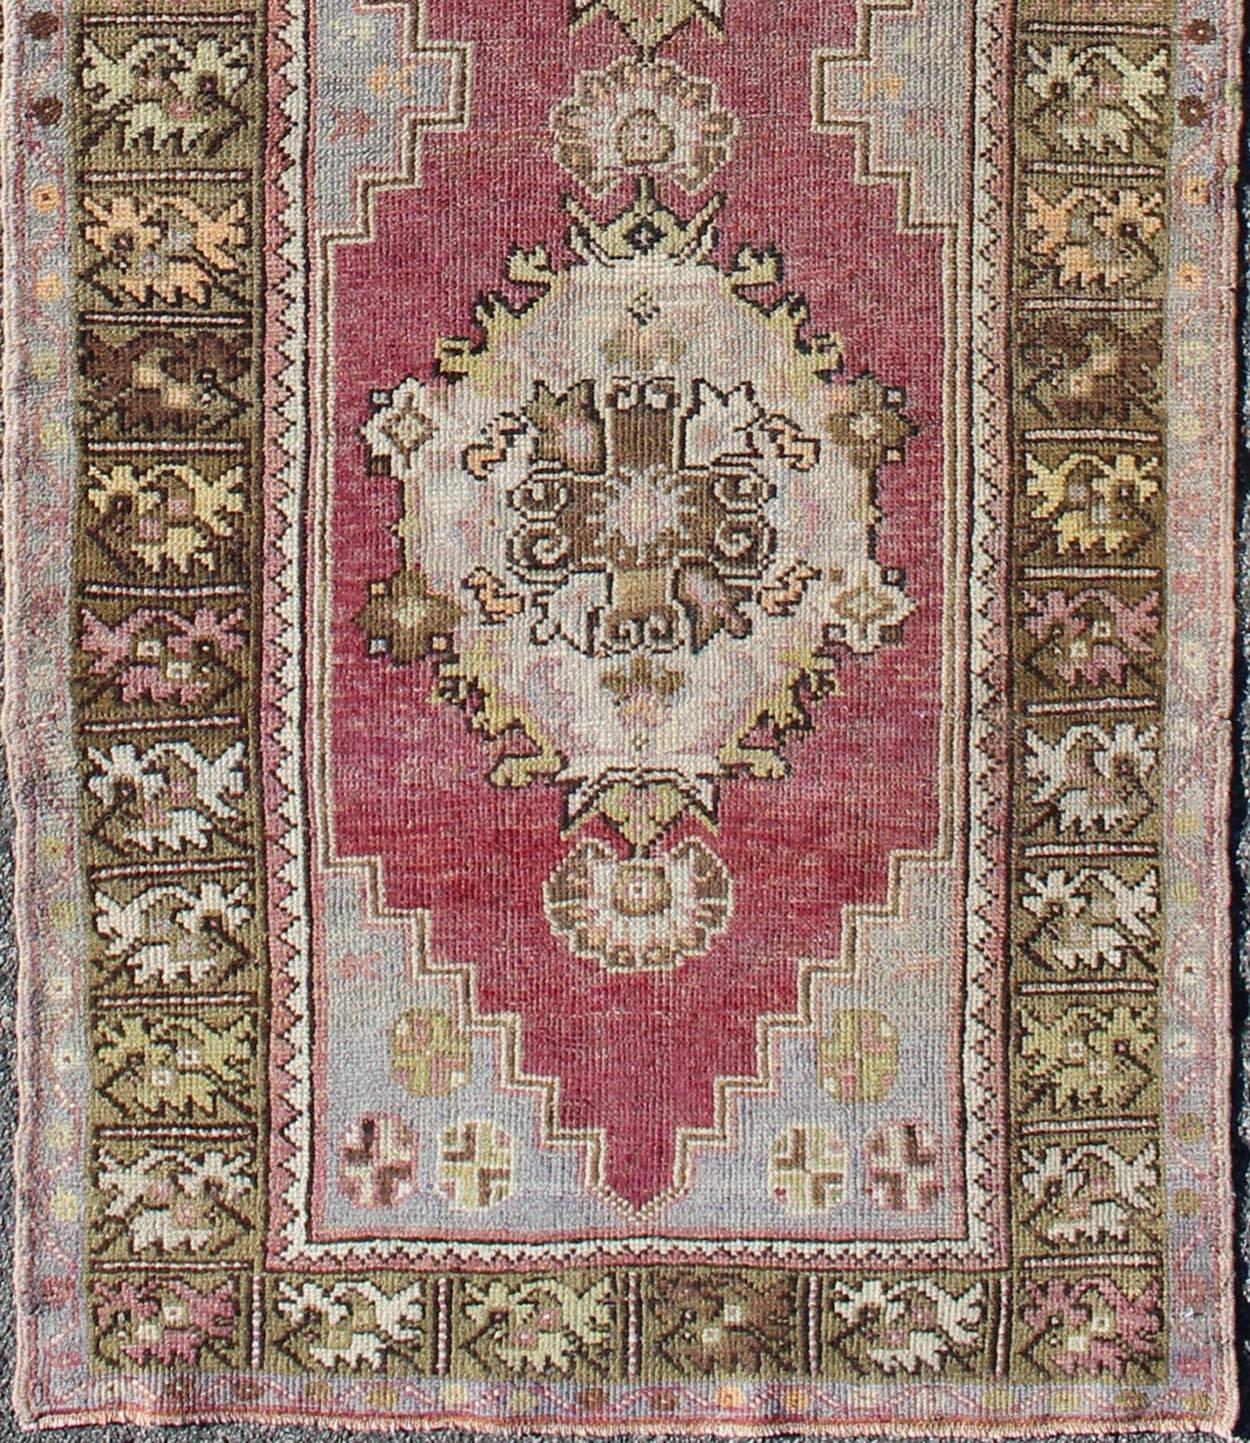 Berry tri-medallion vintage Turkey Oushak runner with gray, camel, blush accents, rug tu-trs-95153, country of origin / type: Turkey / Oushak, circa 1940

This vintage Turkish Oushak runner (circa mid-20th century) features a central tri-medallion